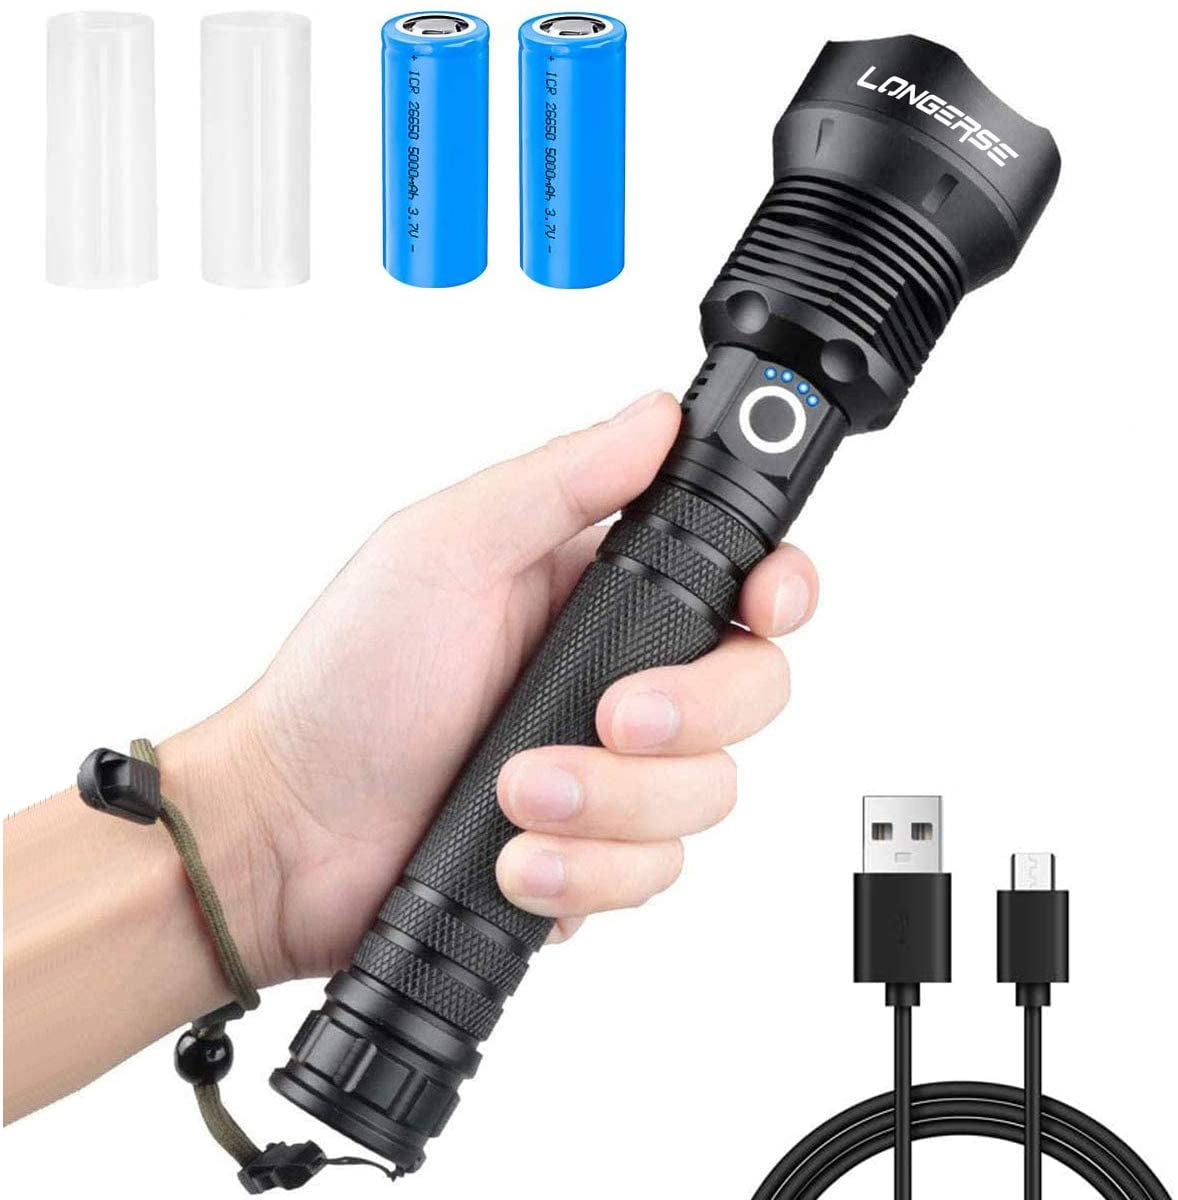 350000LM T6 LED Rechargeable High Power Torch Flashlight Lamp Lights & Charger